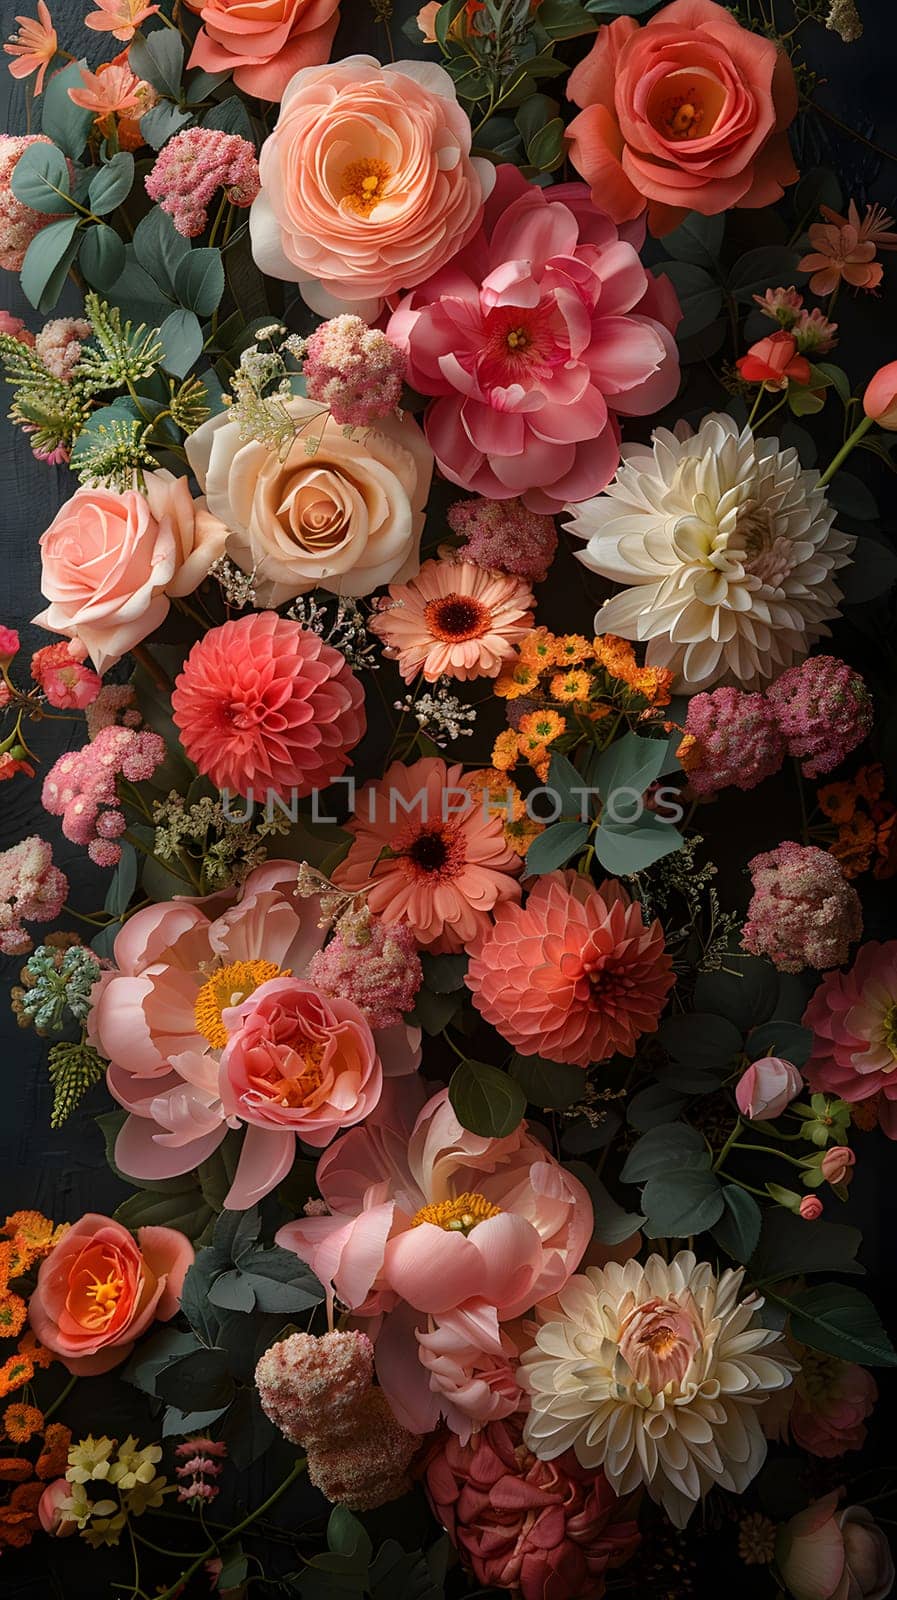 Various flowers including pink hybrid tea roses in this picture by Nadtochiy